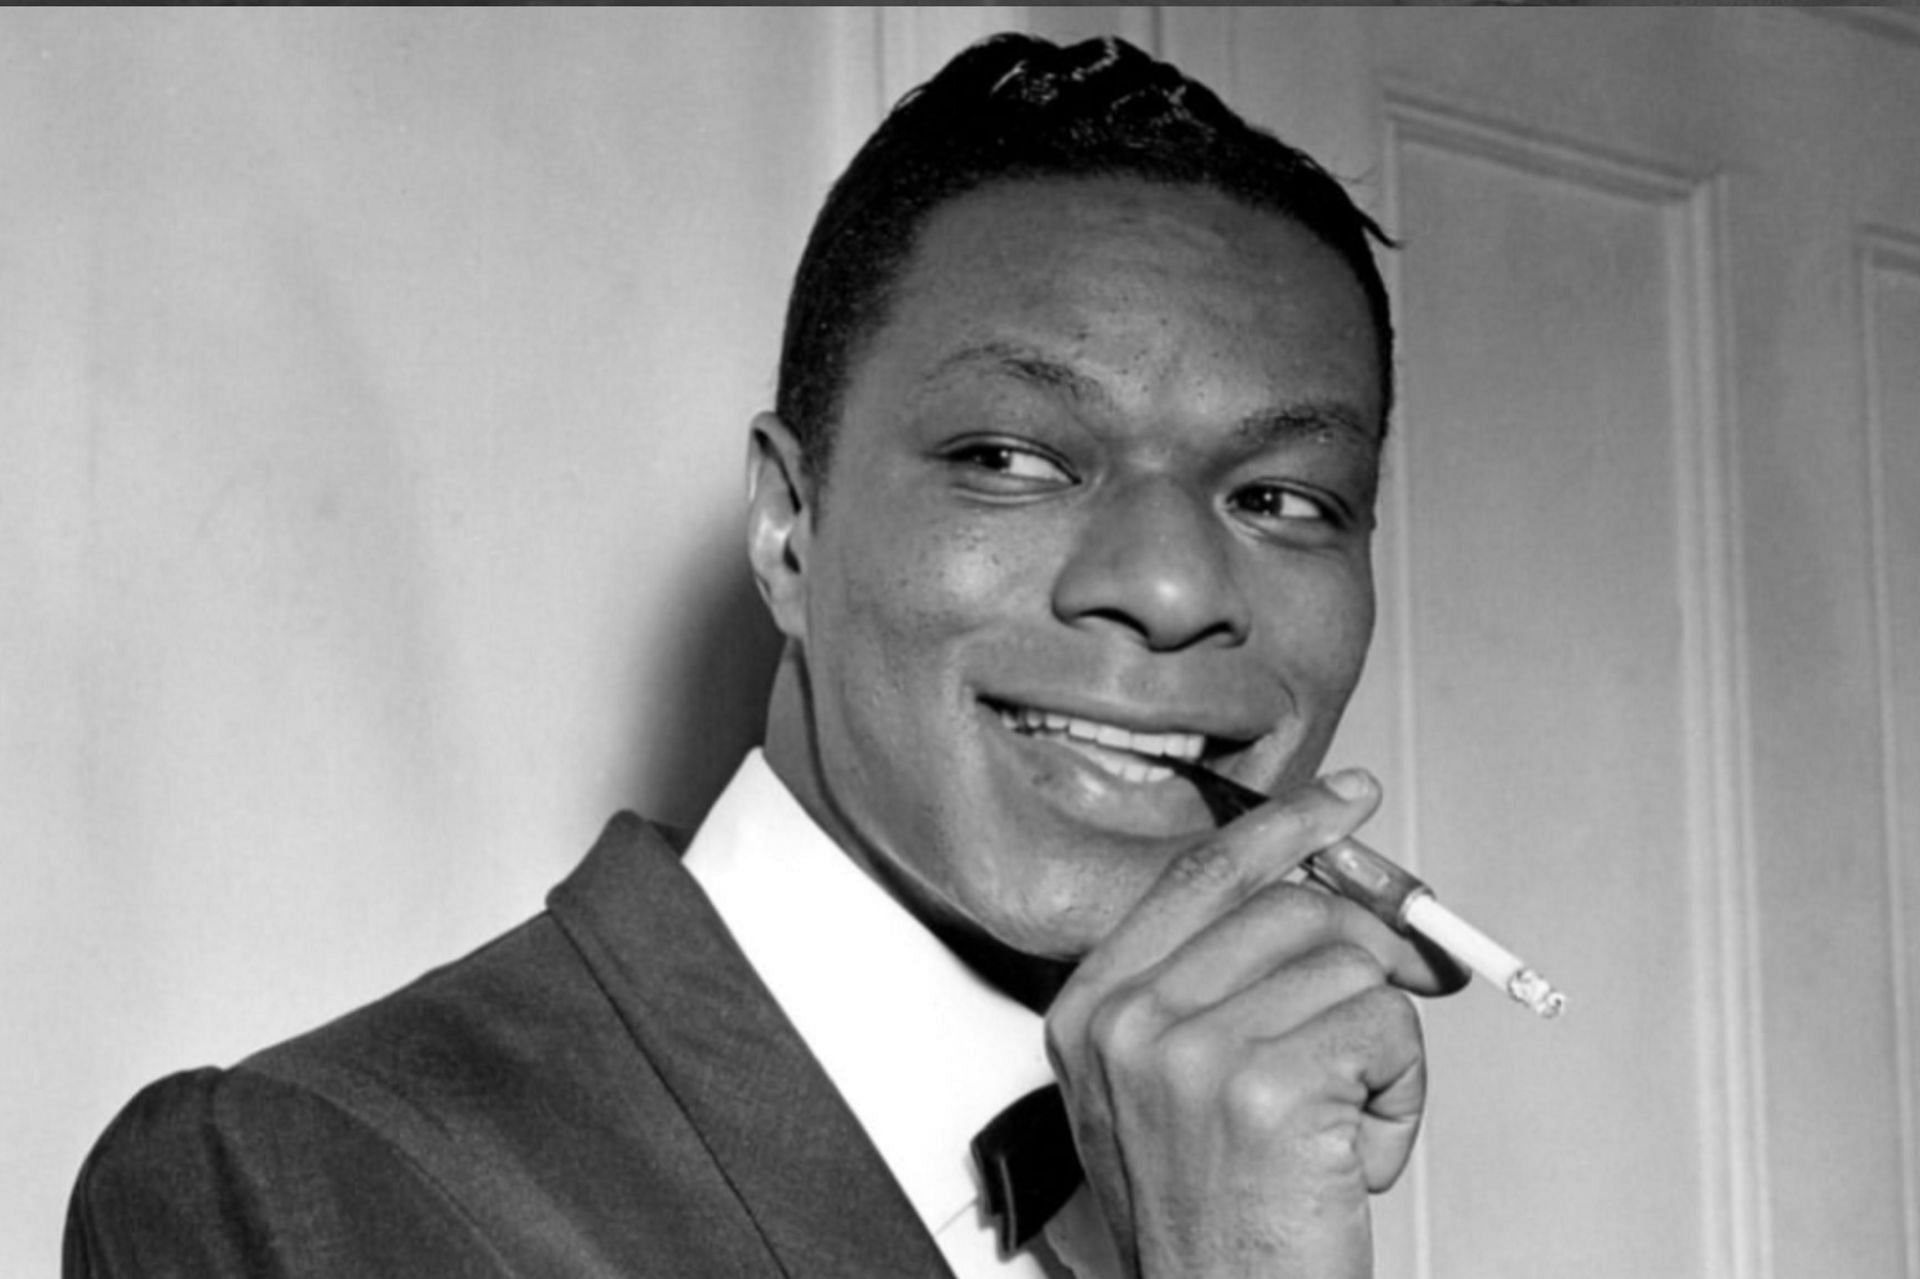 Nat King Cole died due to smoking cigarettes (Image via Instagram/@soniceditions)